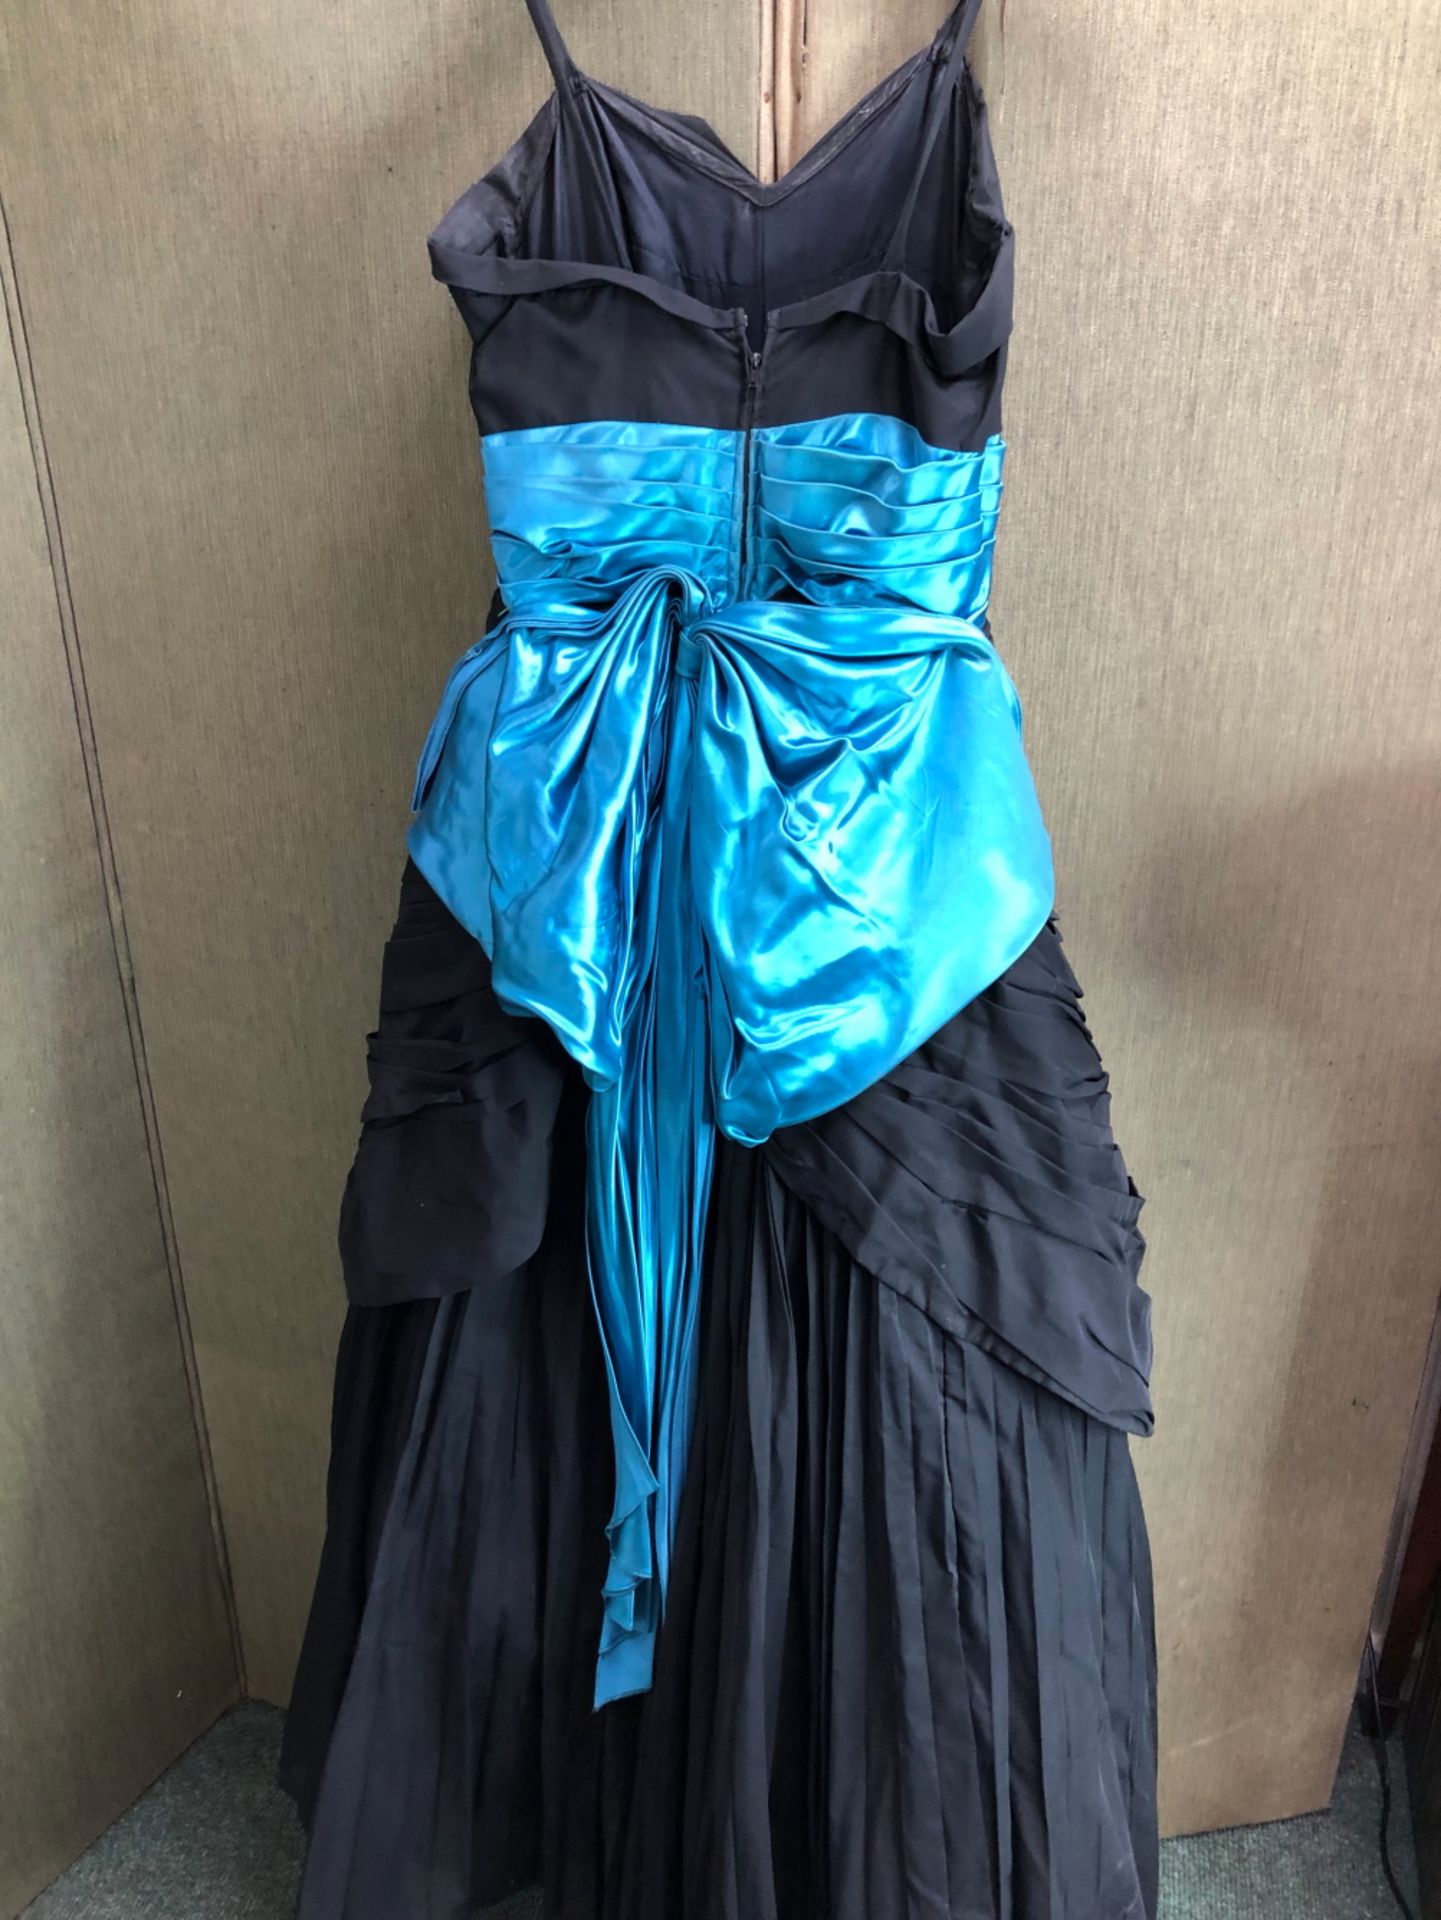 A BLACK EVENING DRESS WITH BRIGHT BLUE RIBBON - Image 2 of 5